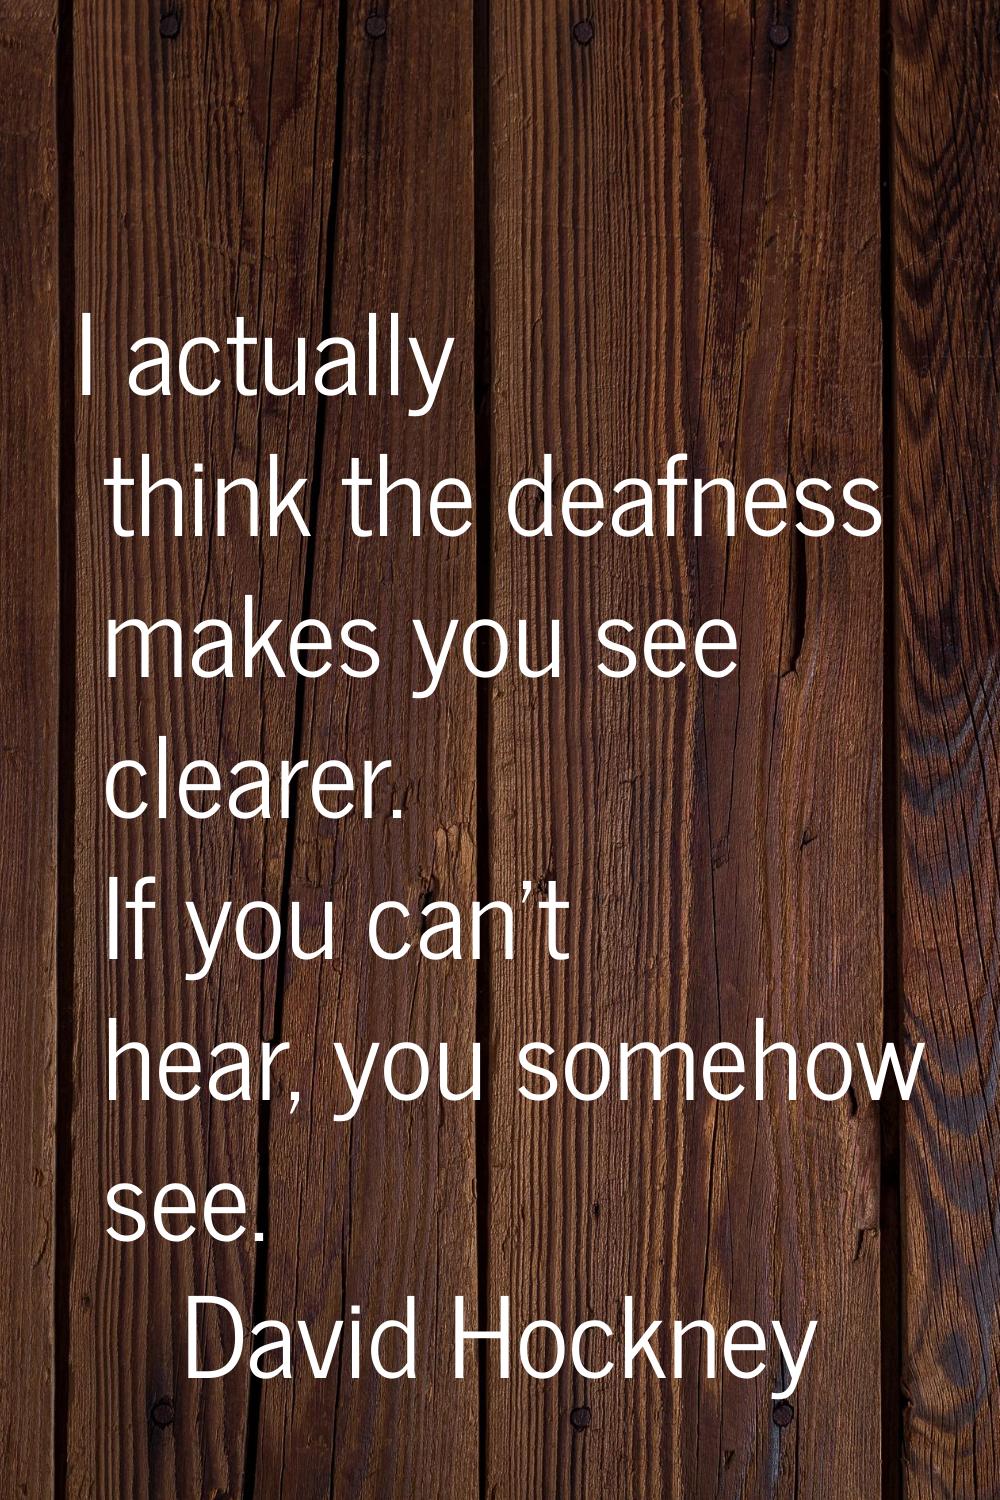 I actually think the deafness makes you see clearer. If you can't hear, you somehow see.